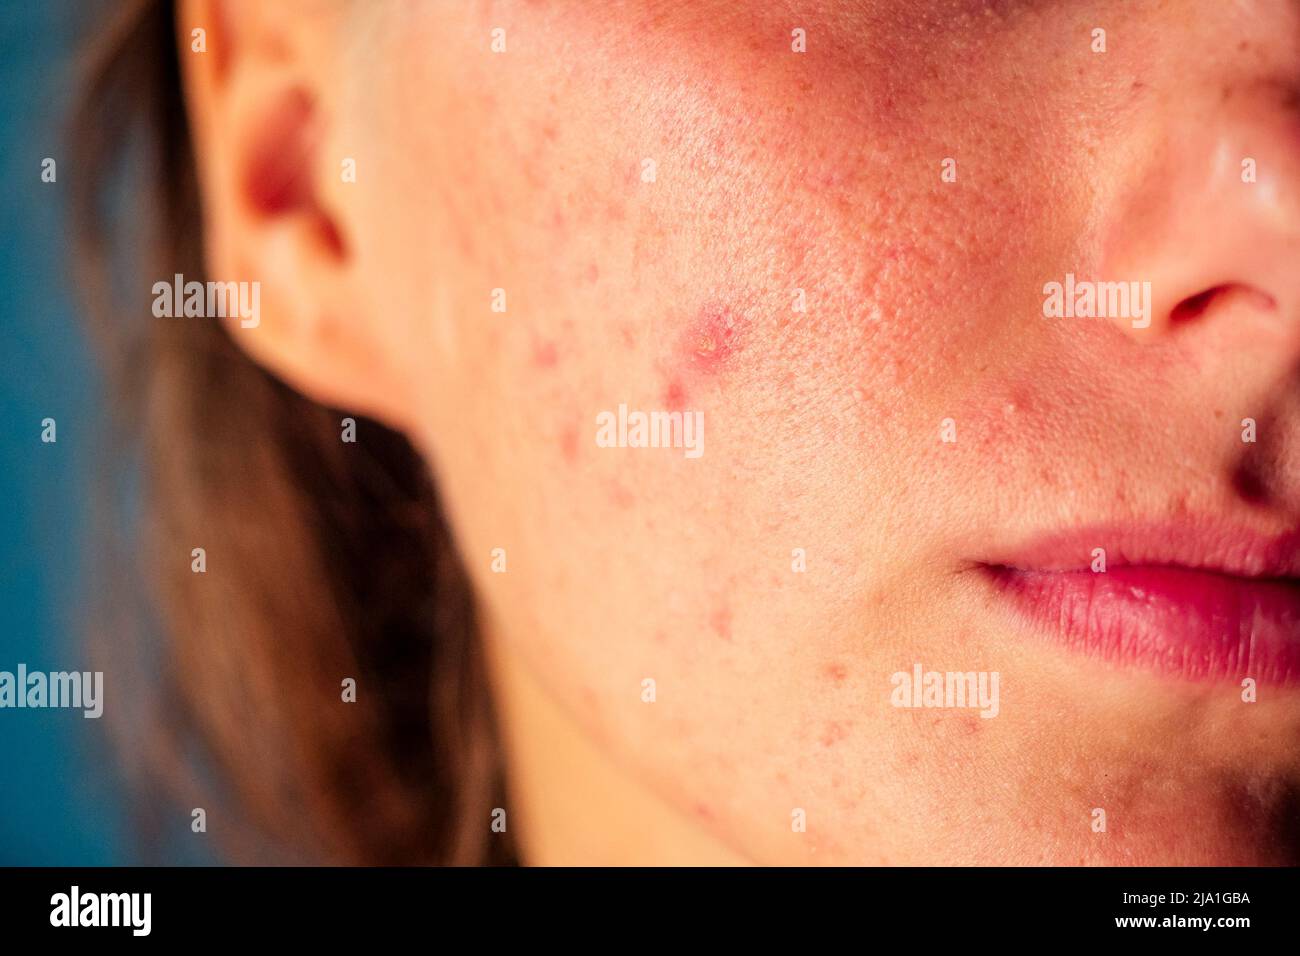 post-acne, scars and red festering pimples on the face of a young woman. concept of skin problems and harmonic failure Stock Photo